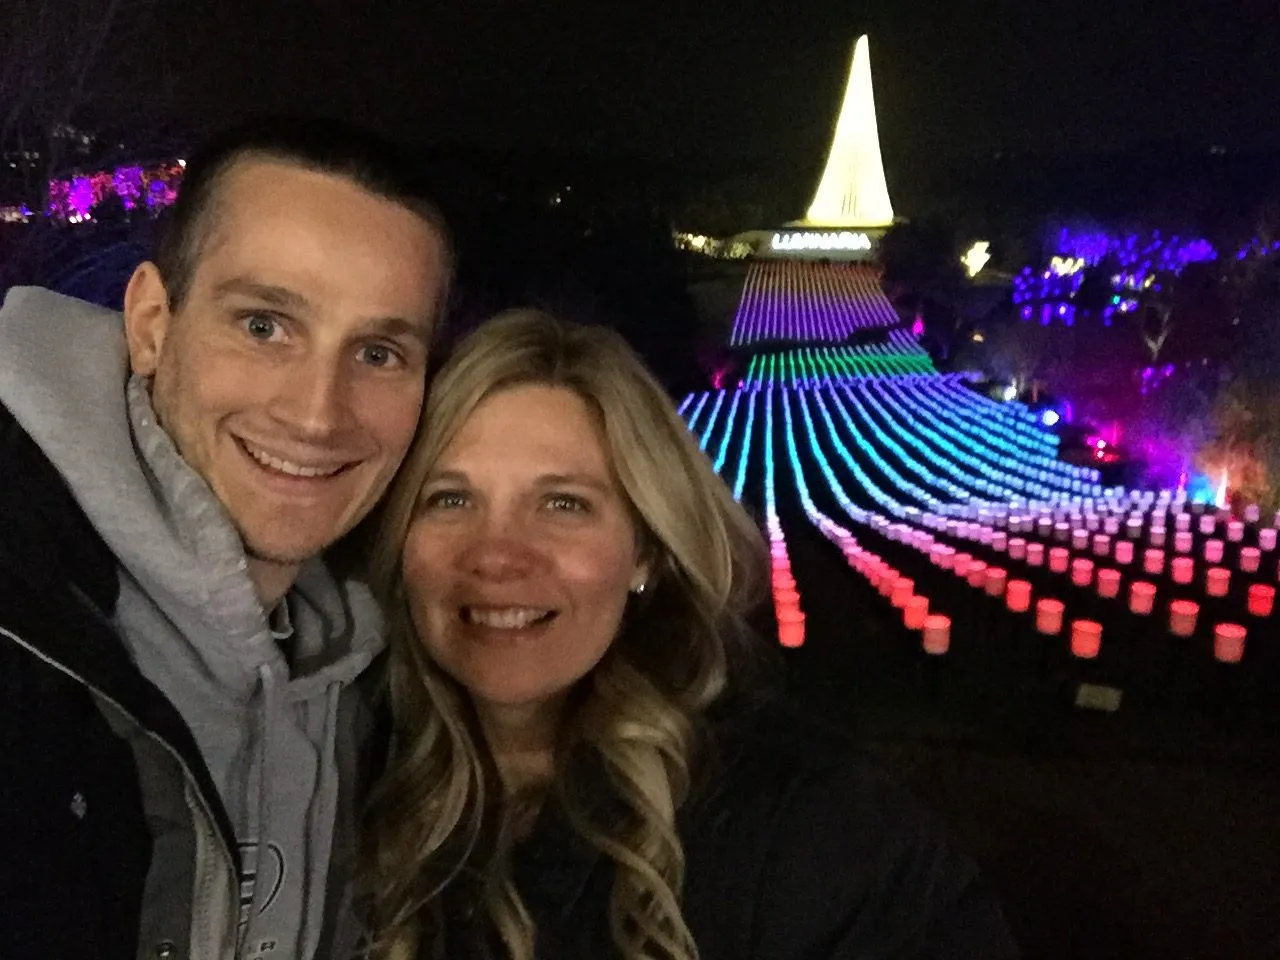 Taking a selfie in front of a large light display at Luminaria